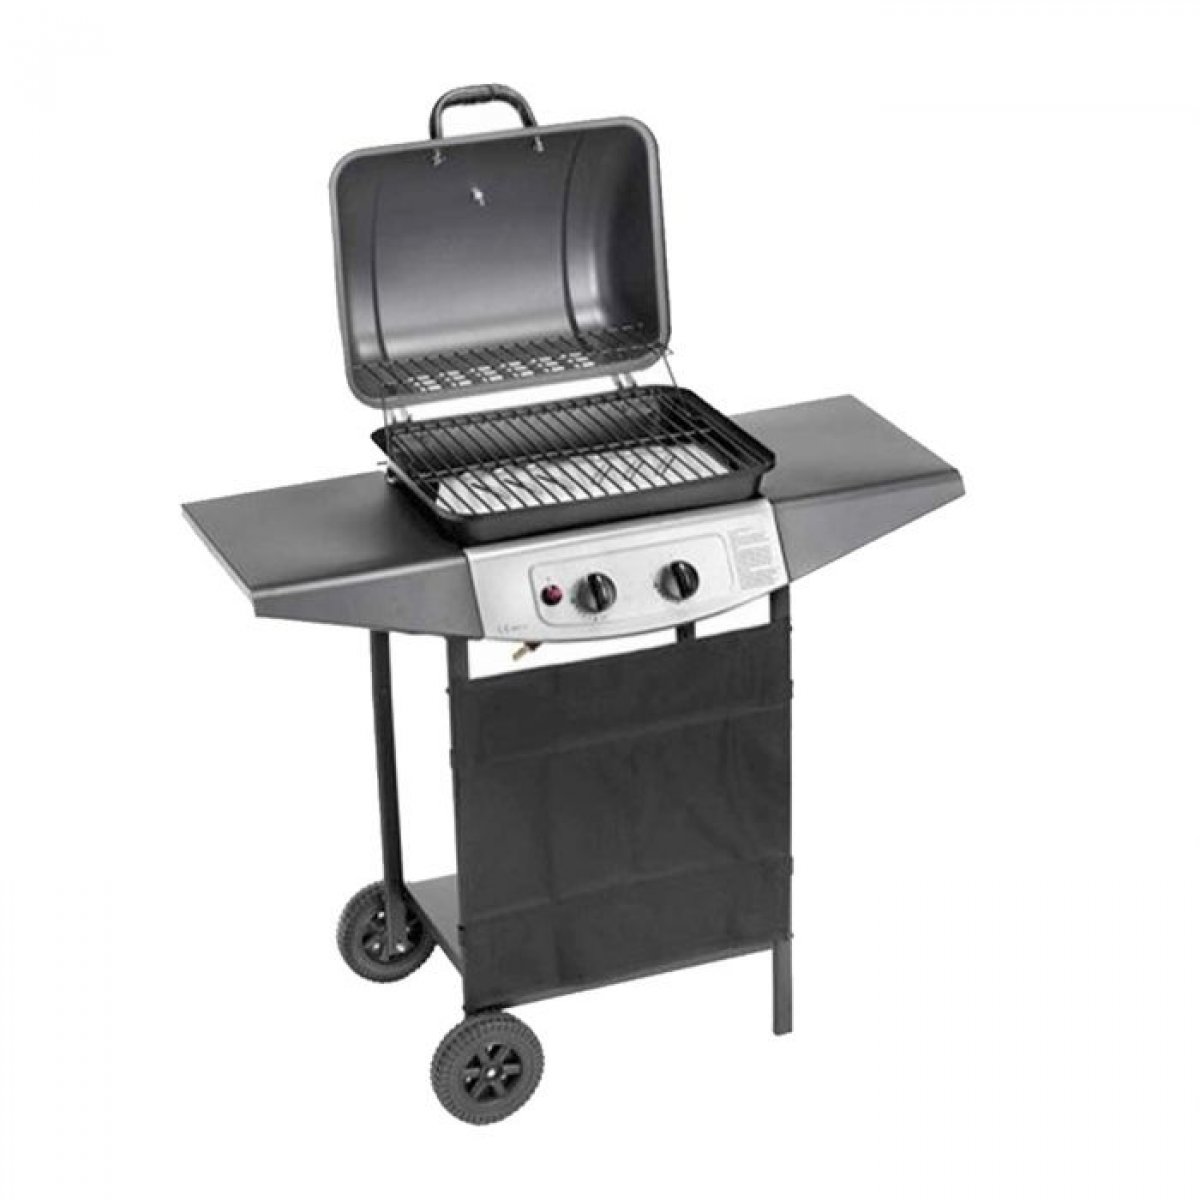 BARBECUE GAS 46x34 ompagrill